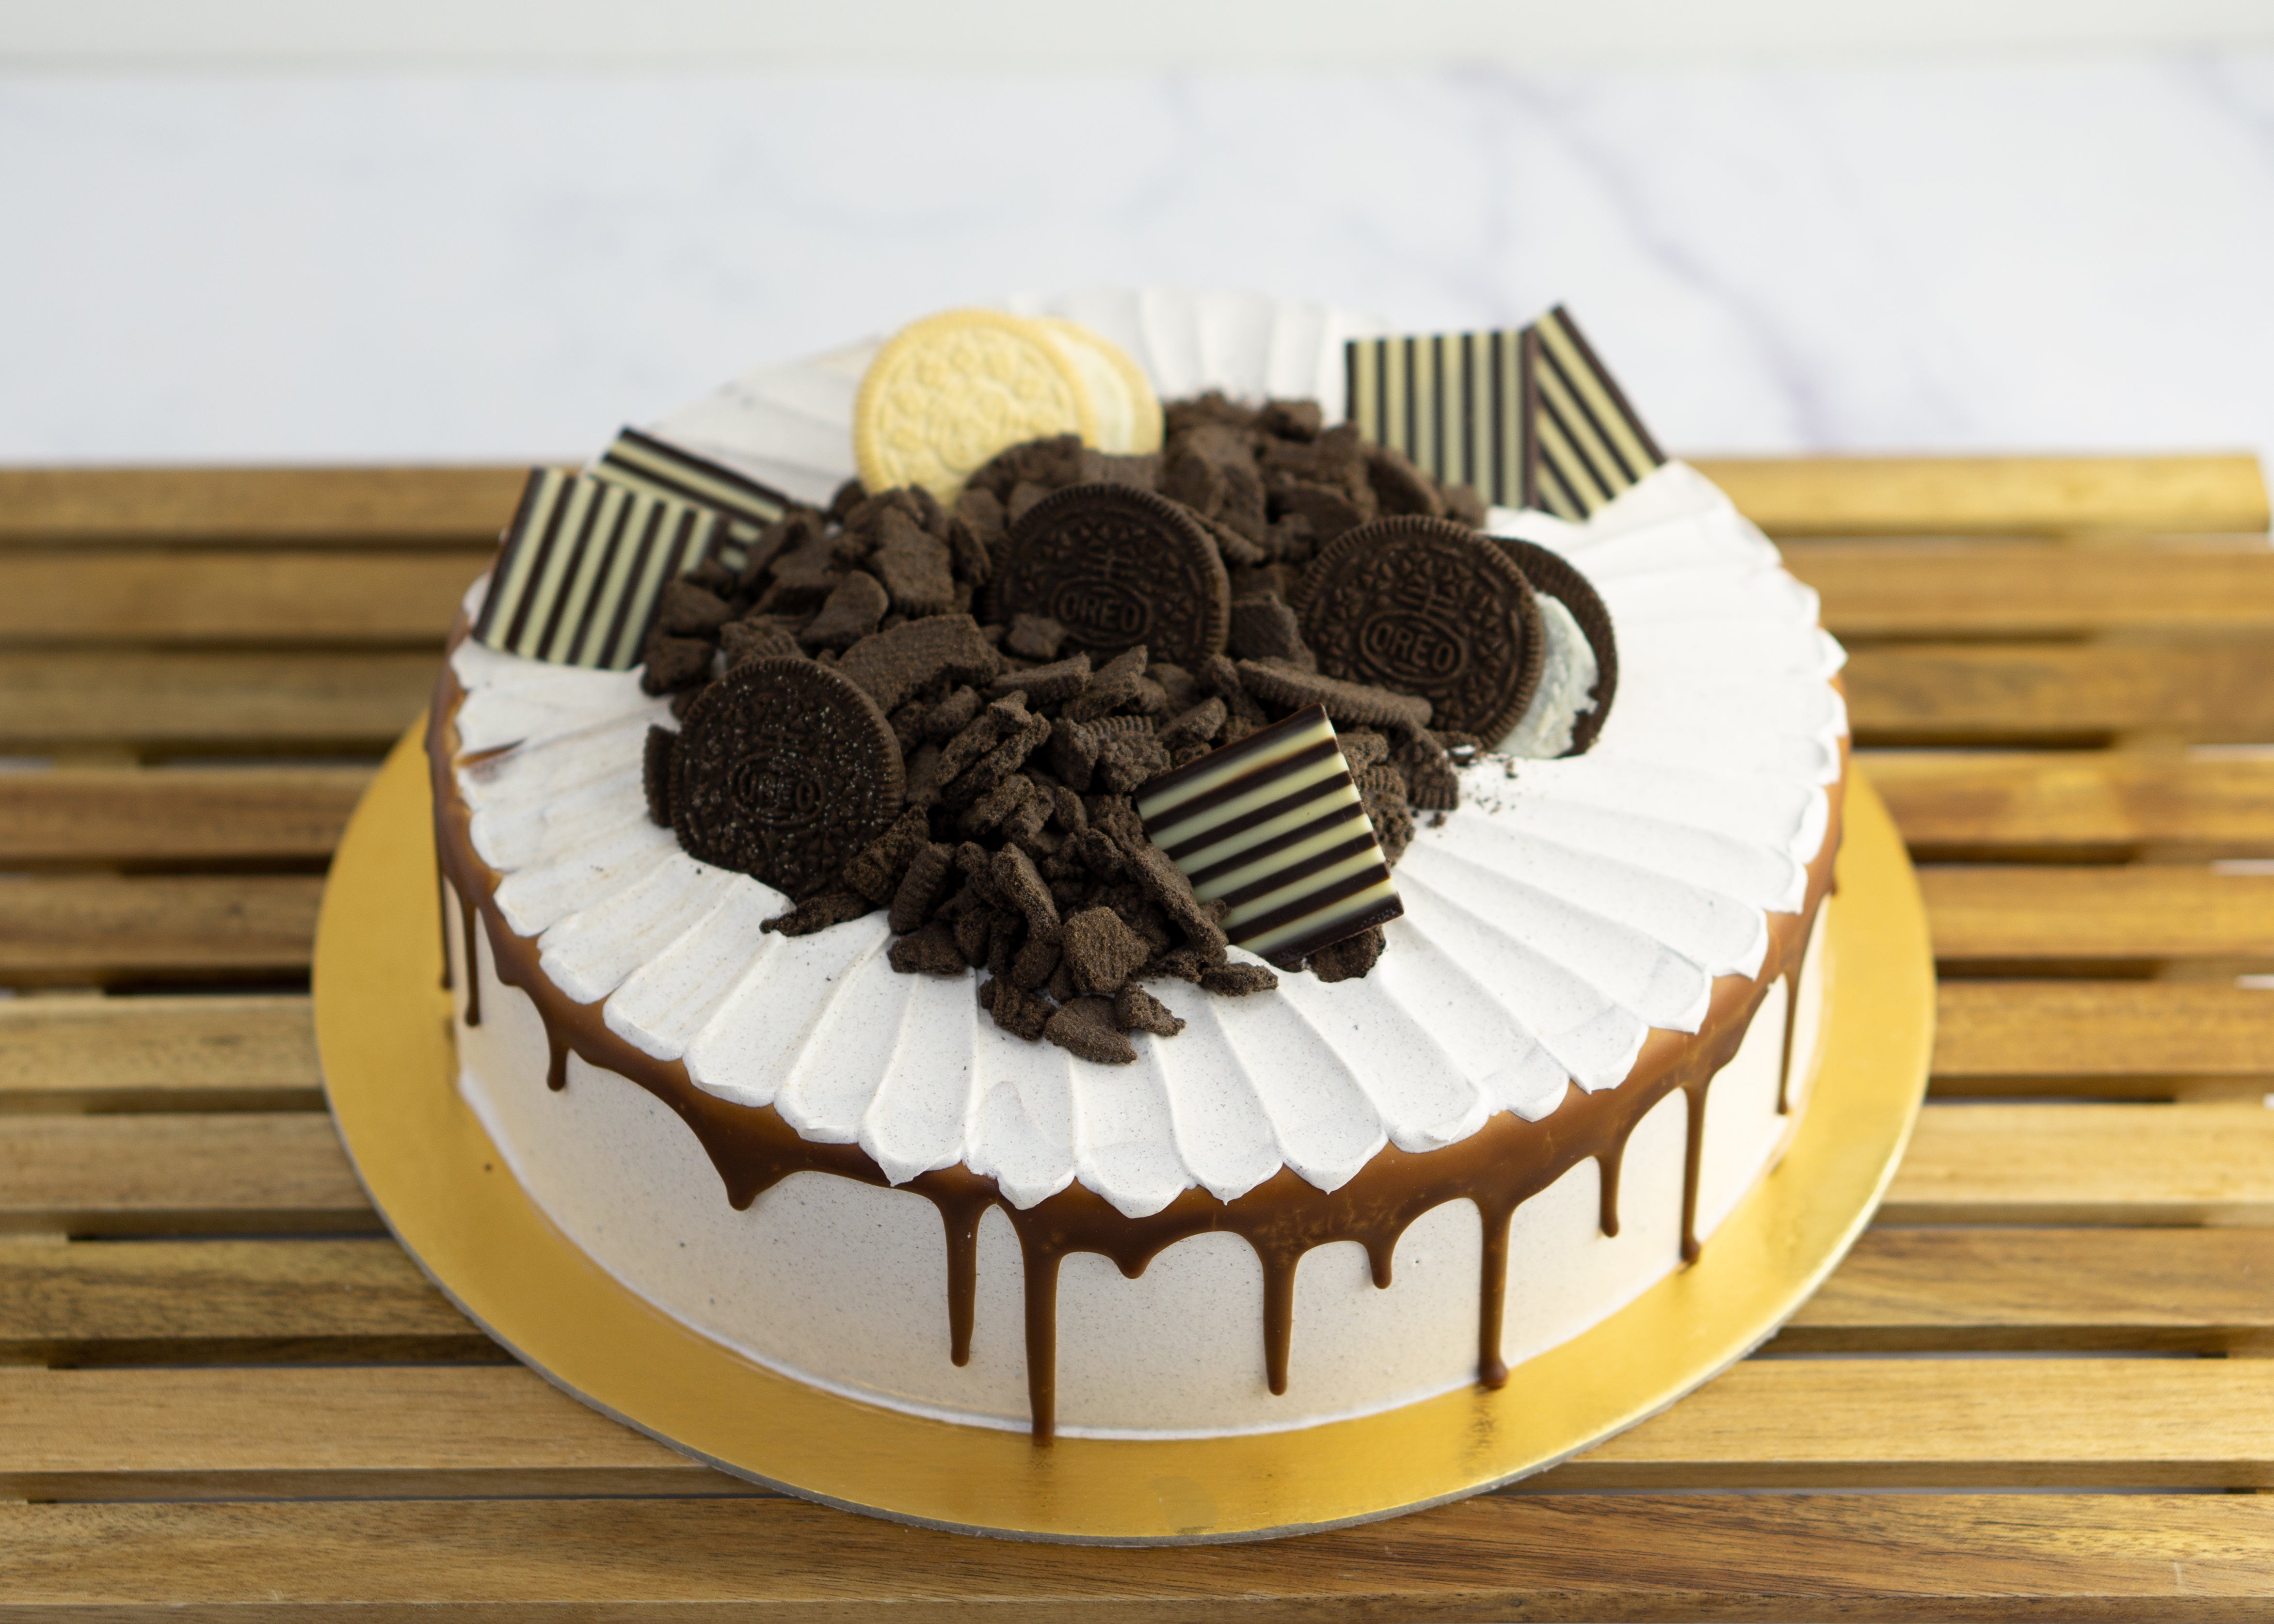 Best Ice Cream Cake Shop - Ibaco | Celebrate Your Birthday With A Difference